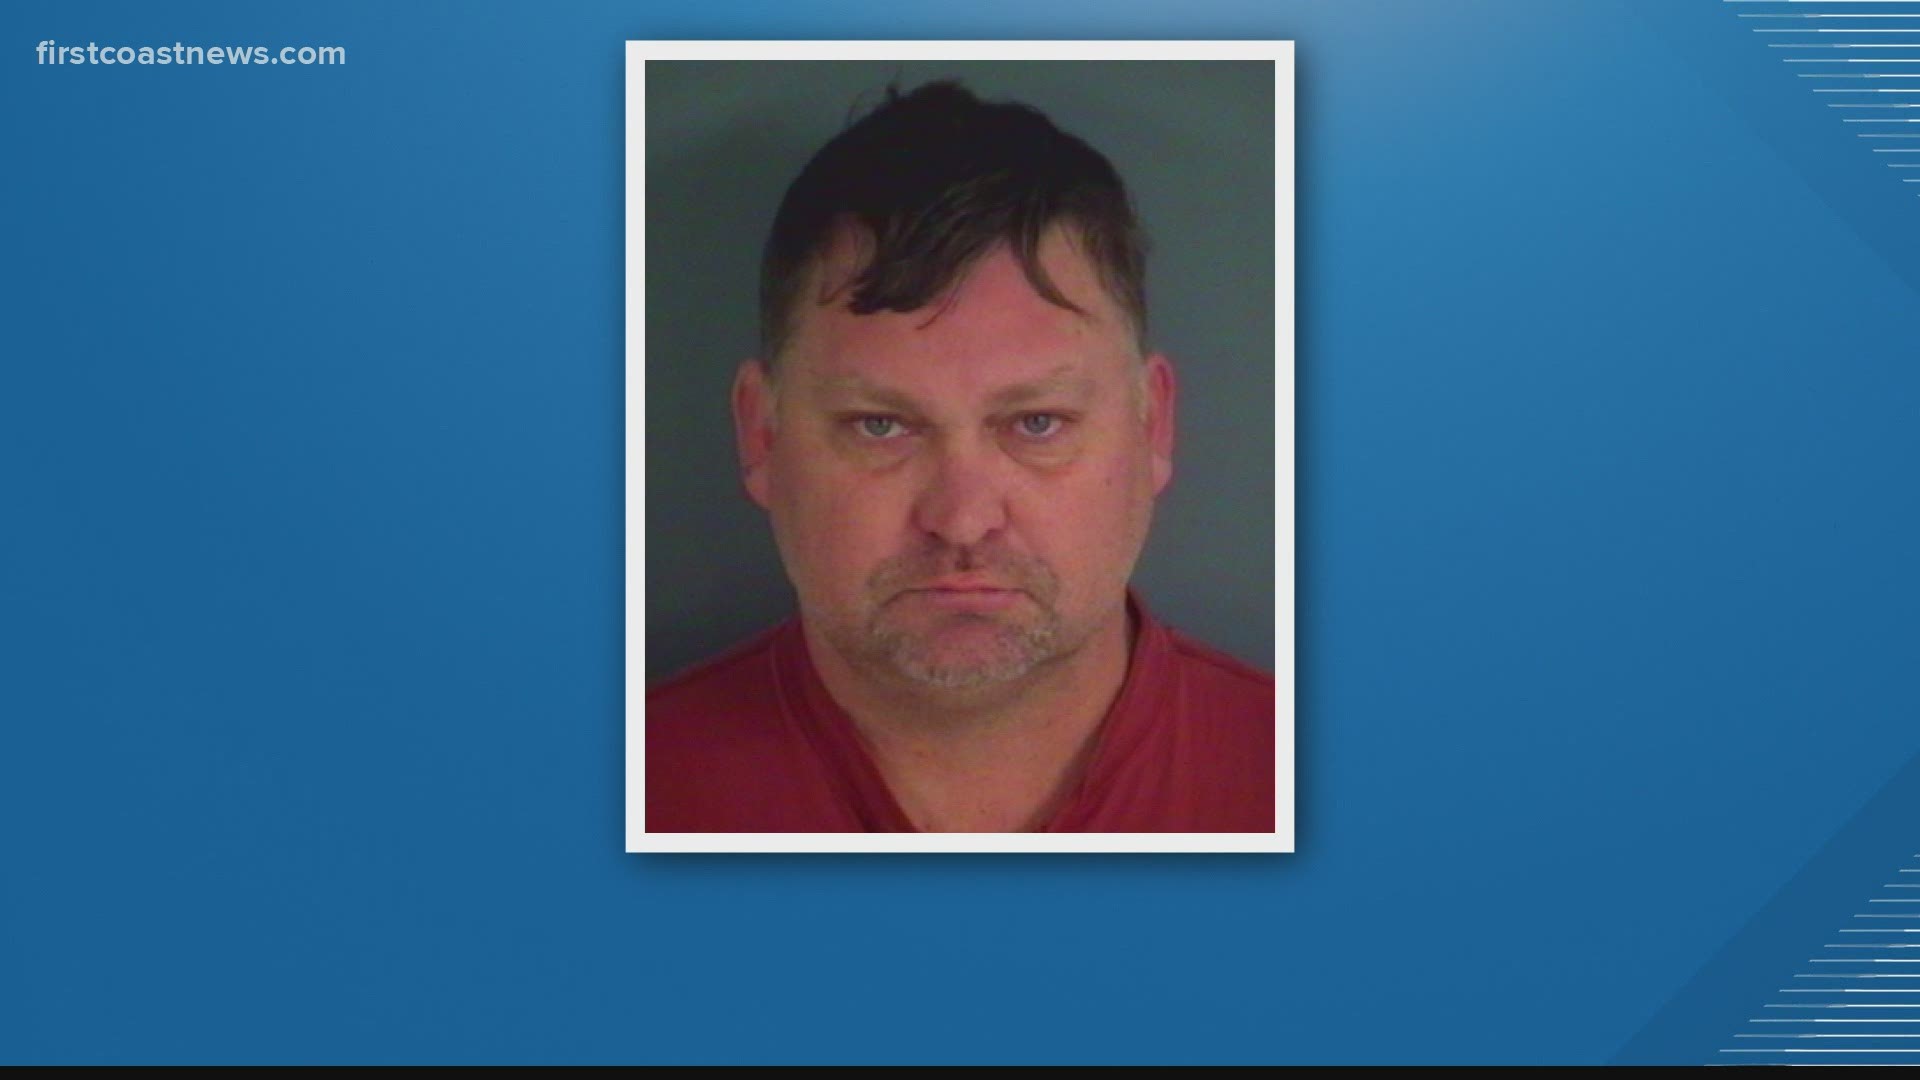 The Clay County Sheriff's Office said Aaron M. Knowles tried to solicit sex with a person he believed to be a 14-year-old.